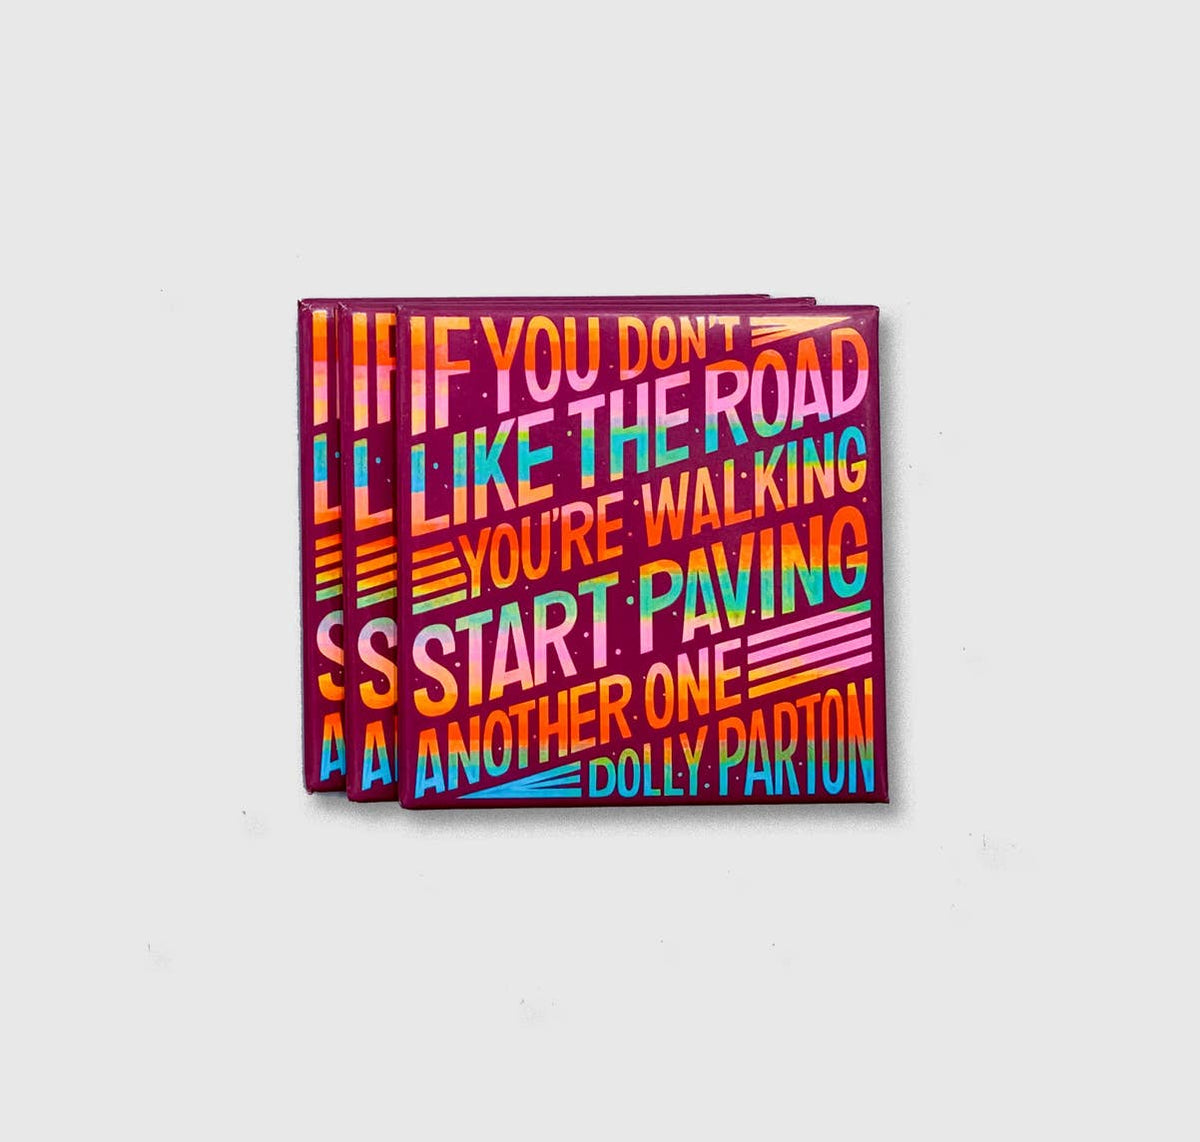 Dolly Parton "Road you're walking" Quote magnet